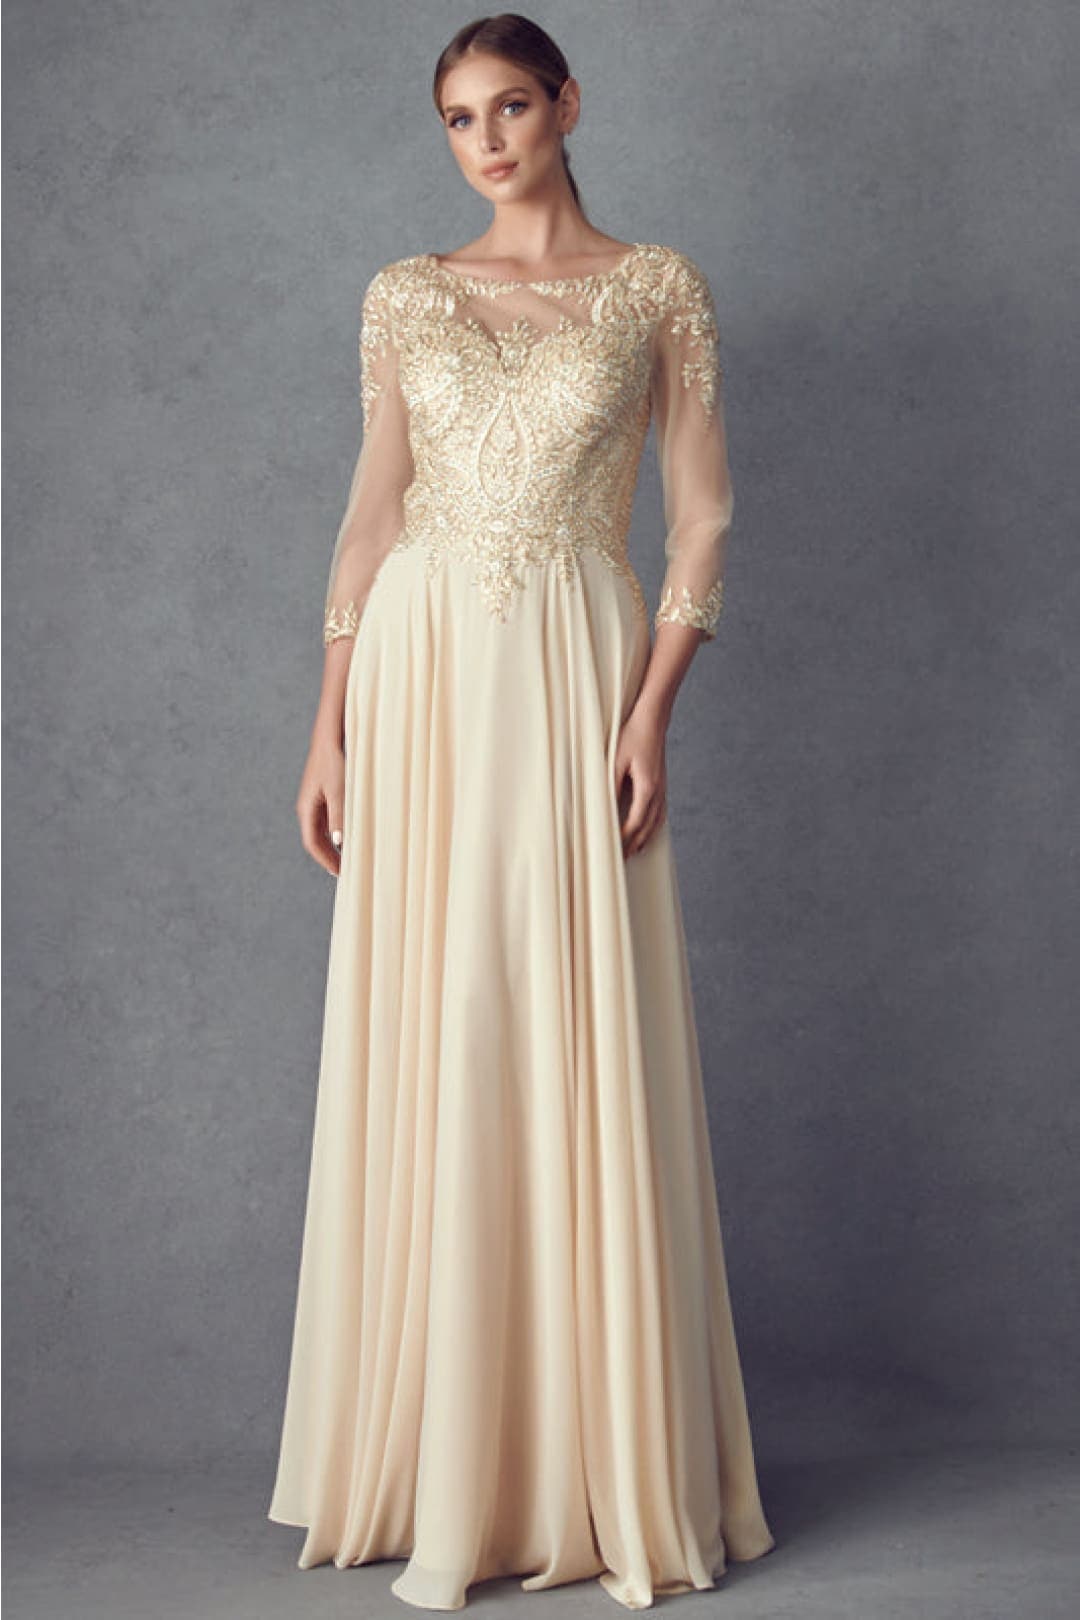  Chiffon Mother of The Bride Dresses Long Lace Appliques V-Neck  Pleat Cap Sleeves Formal Dress Champagne Size 2 : Clothing, Shoes & Jewelry